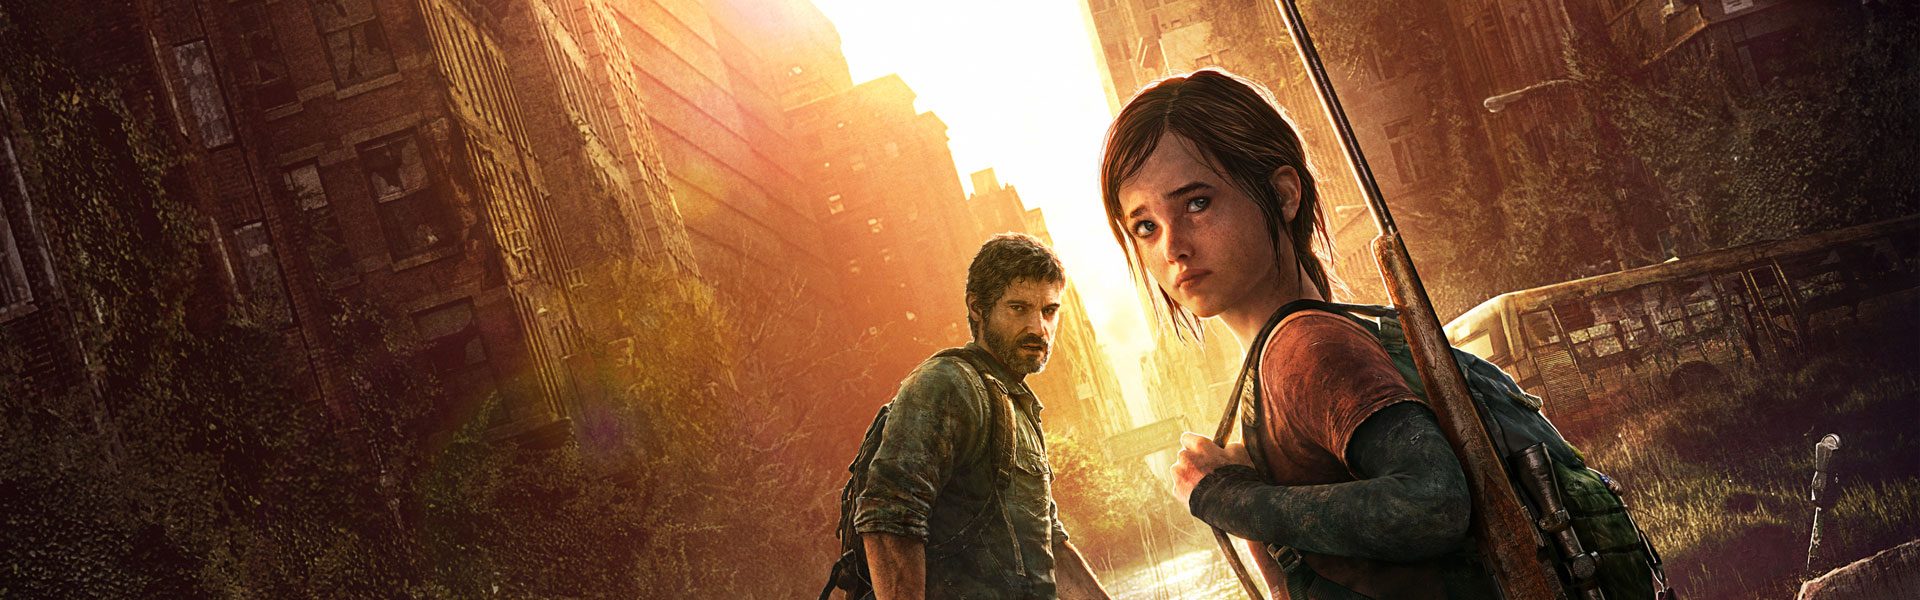 the last of us 1 ps4 price